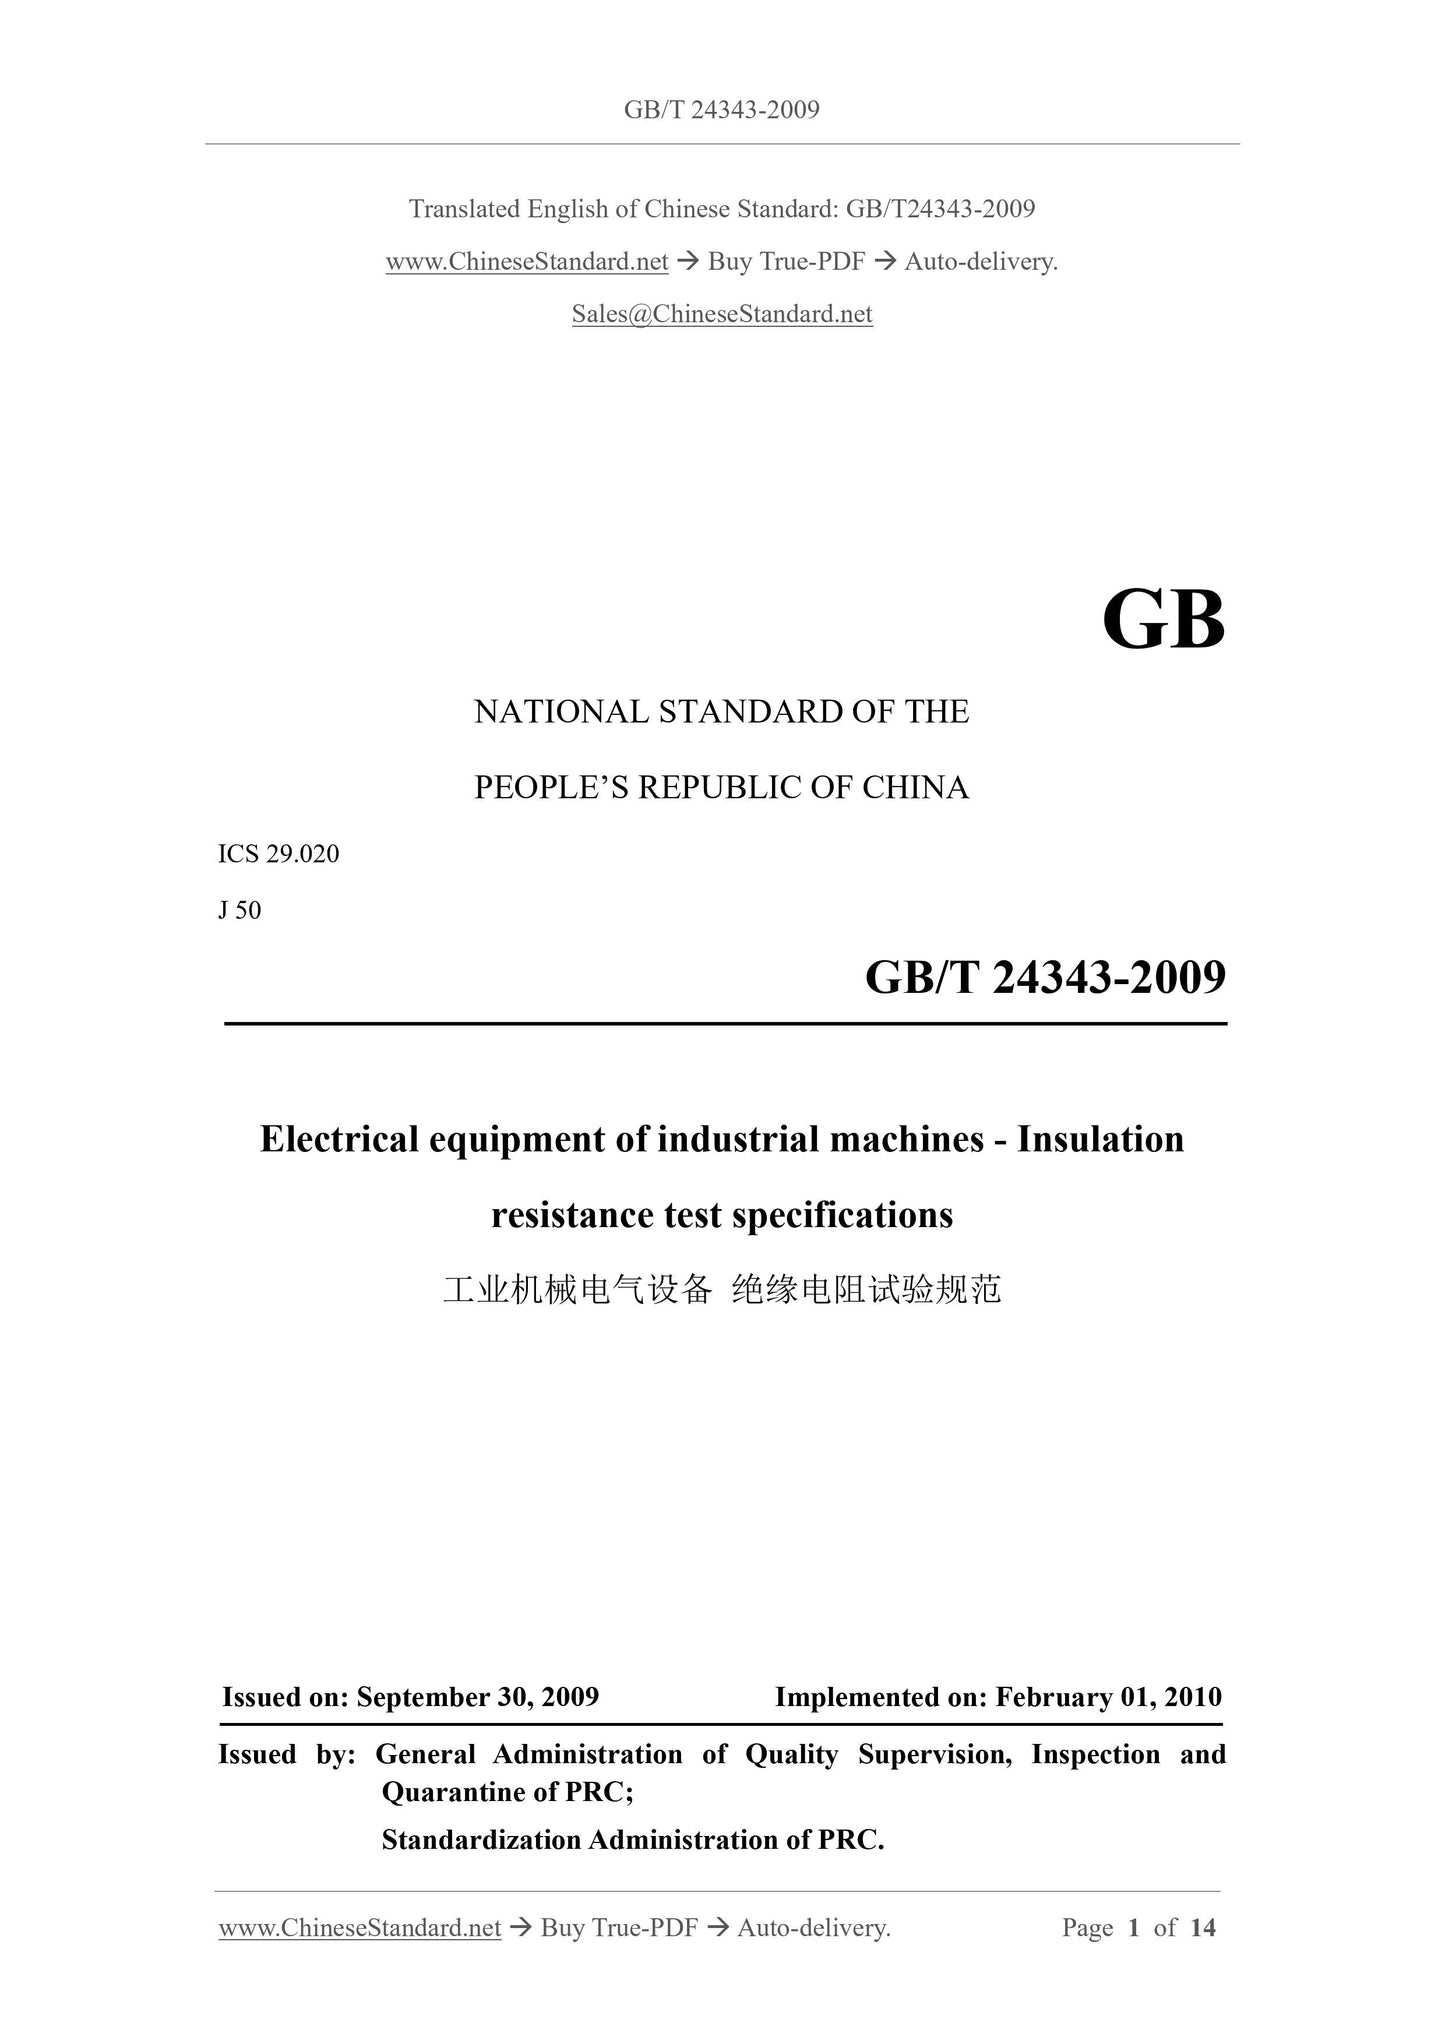 GB/T 24343-2009 Page 1